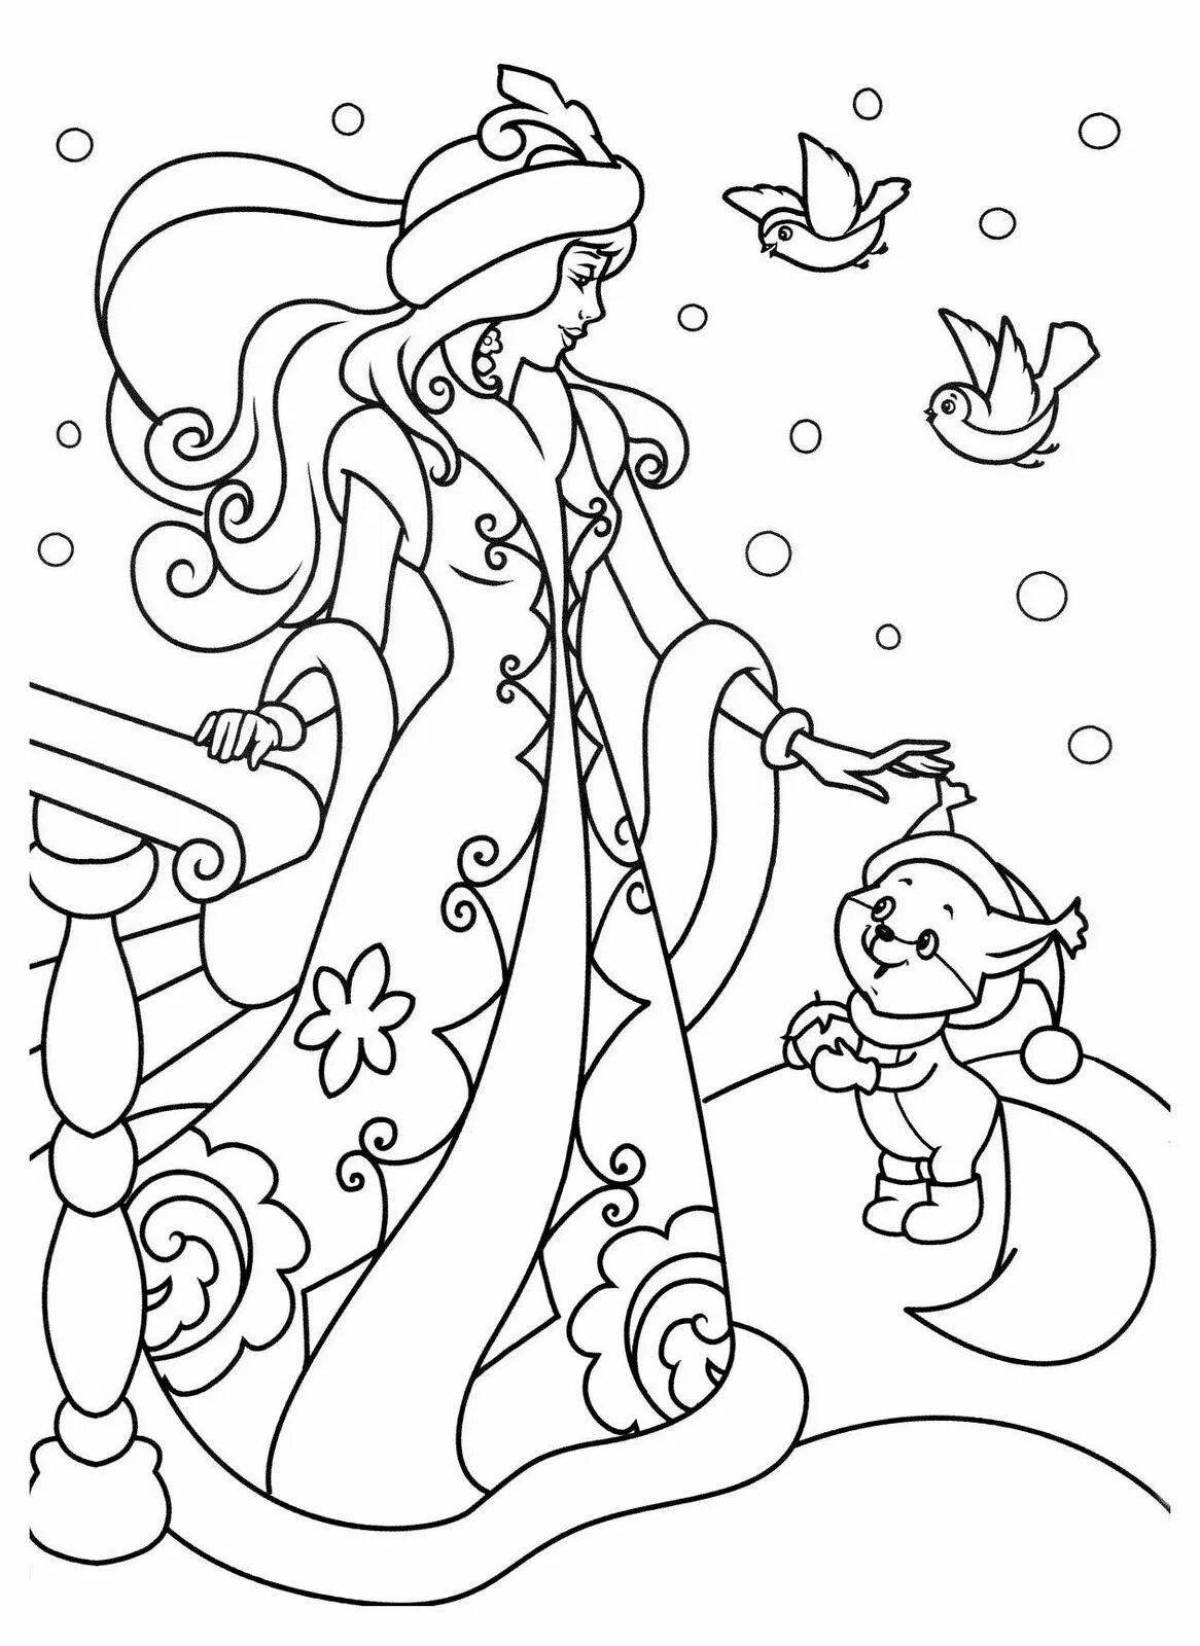 Coloring page violent New Year's snow maiden